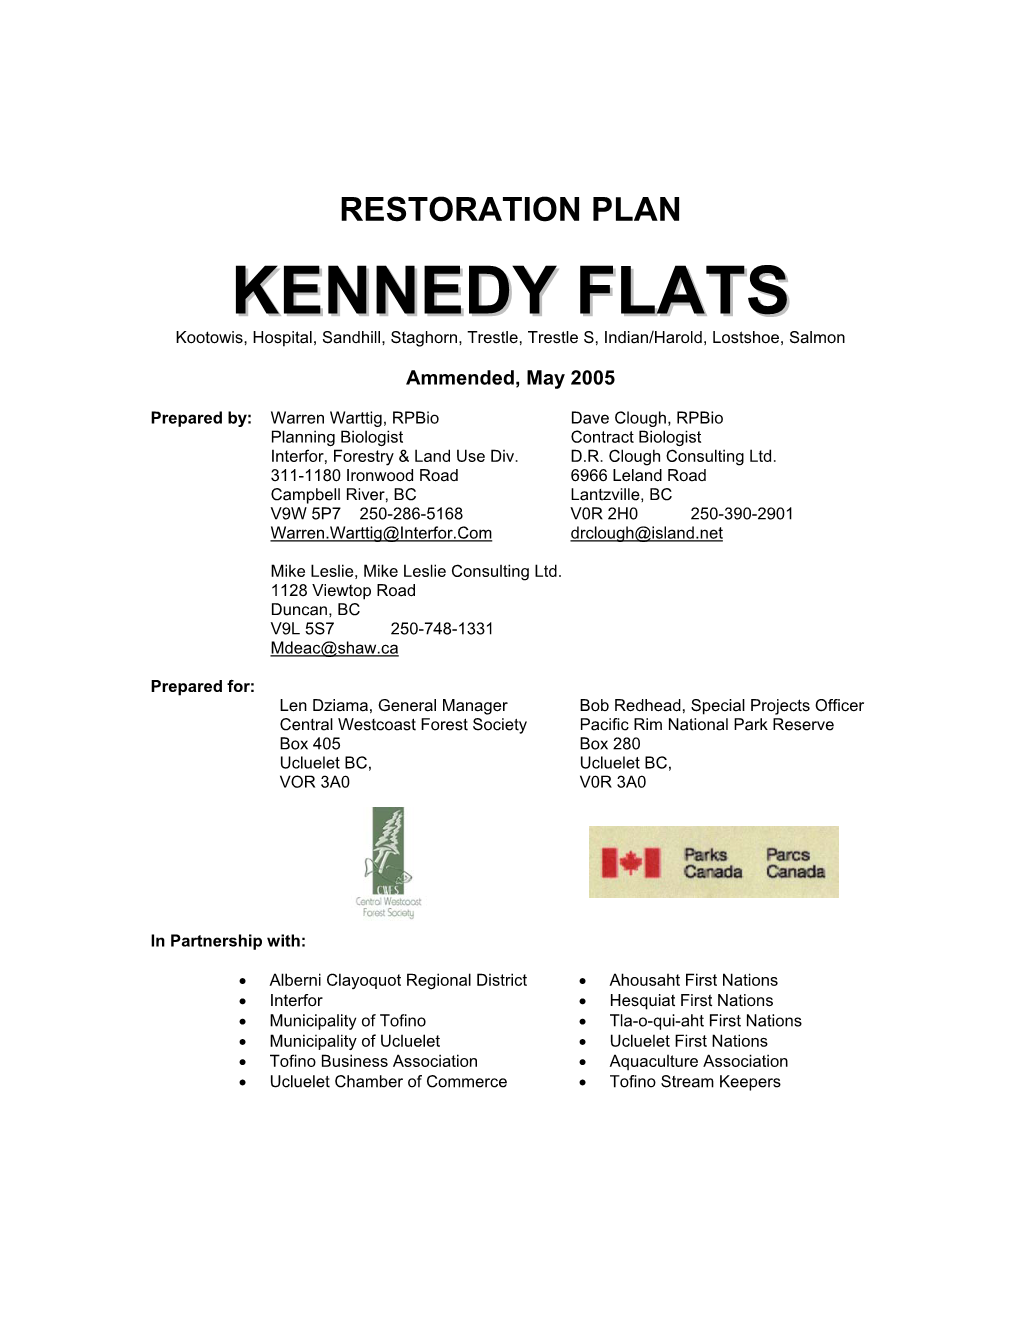 Kennedy Flats Restoration Plan FINAL DRAFT Ammended May 2005